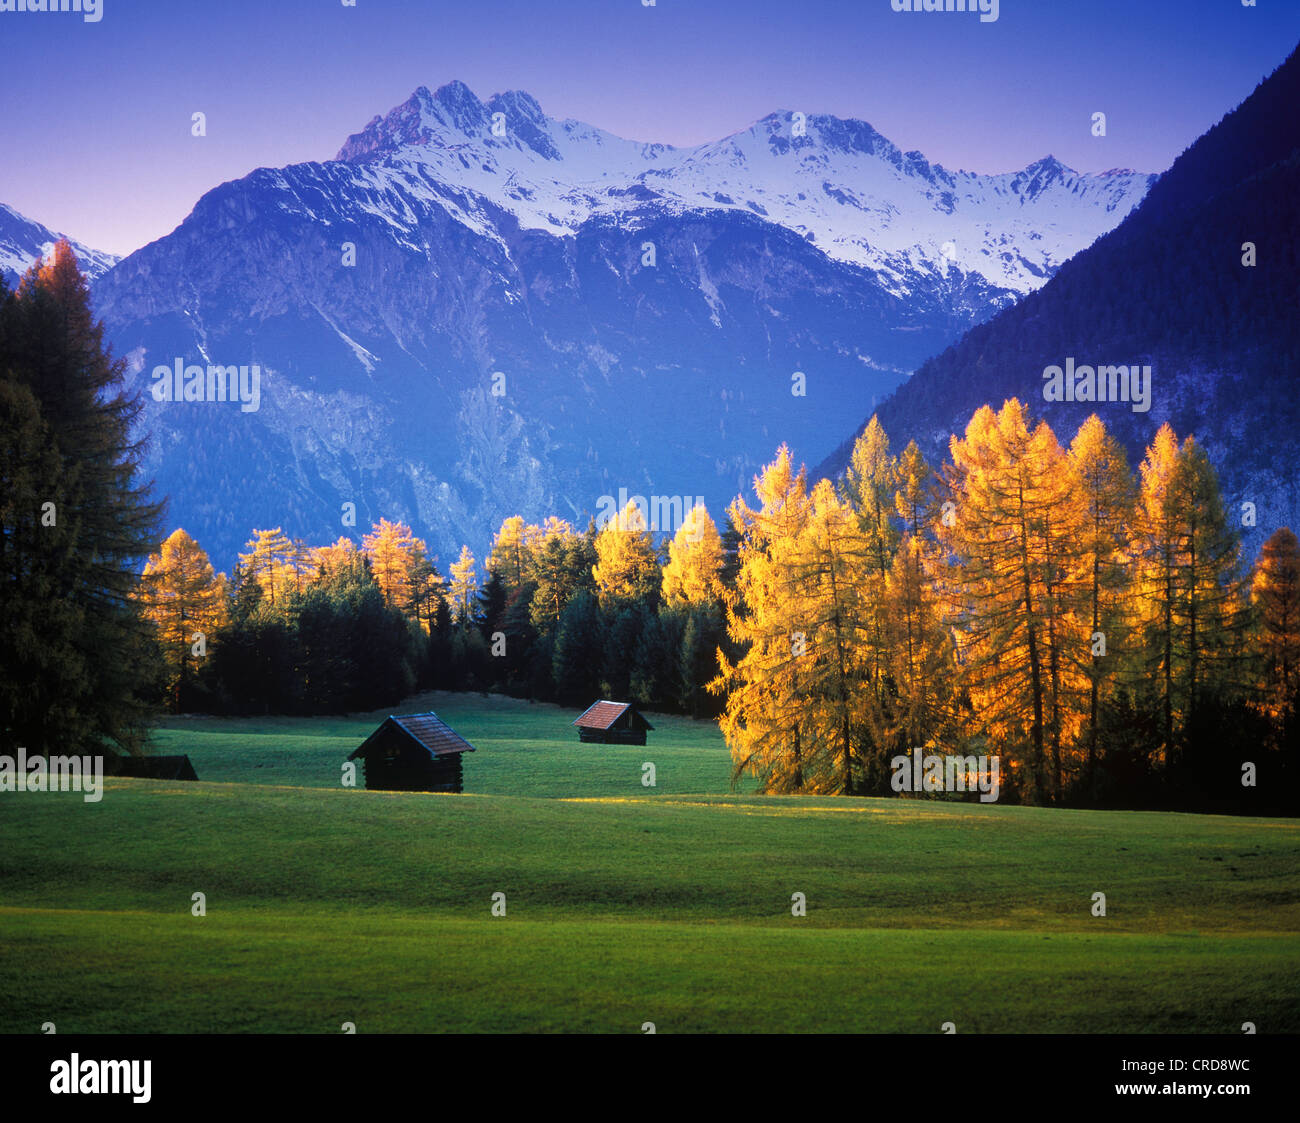 Larch trees in front of the Lechtal Alps, Obsteig, Austria Stock Photo